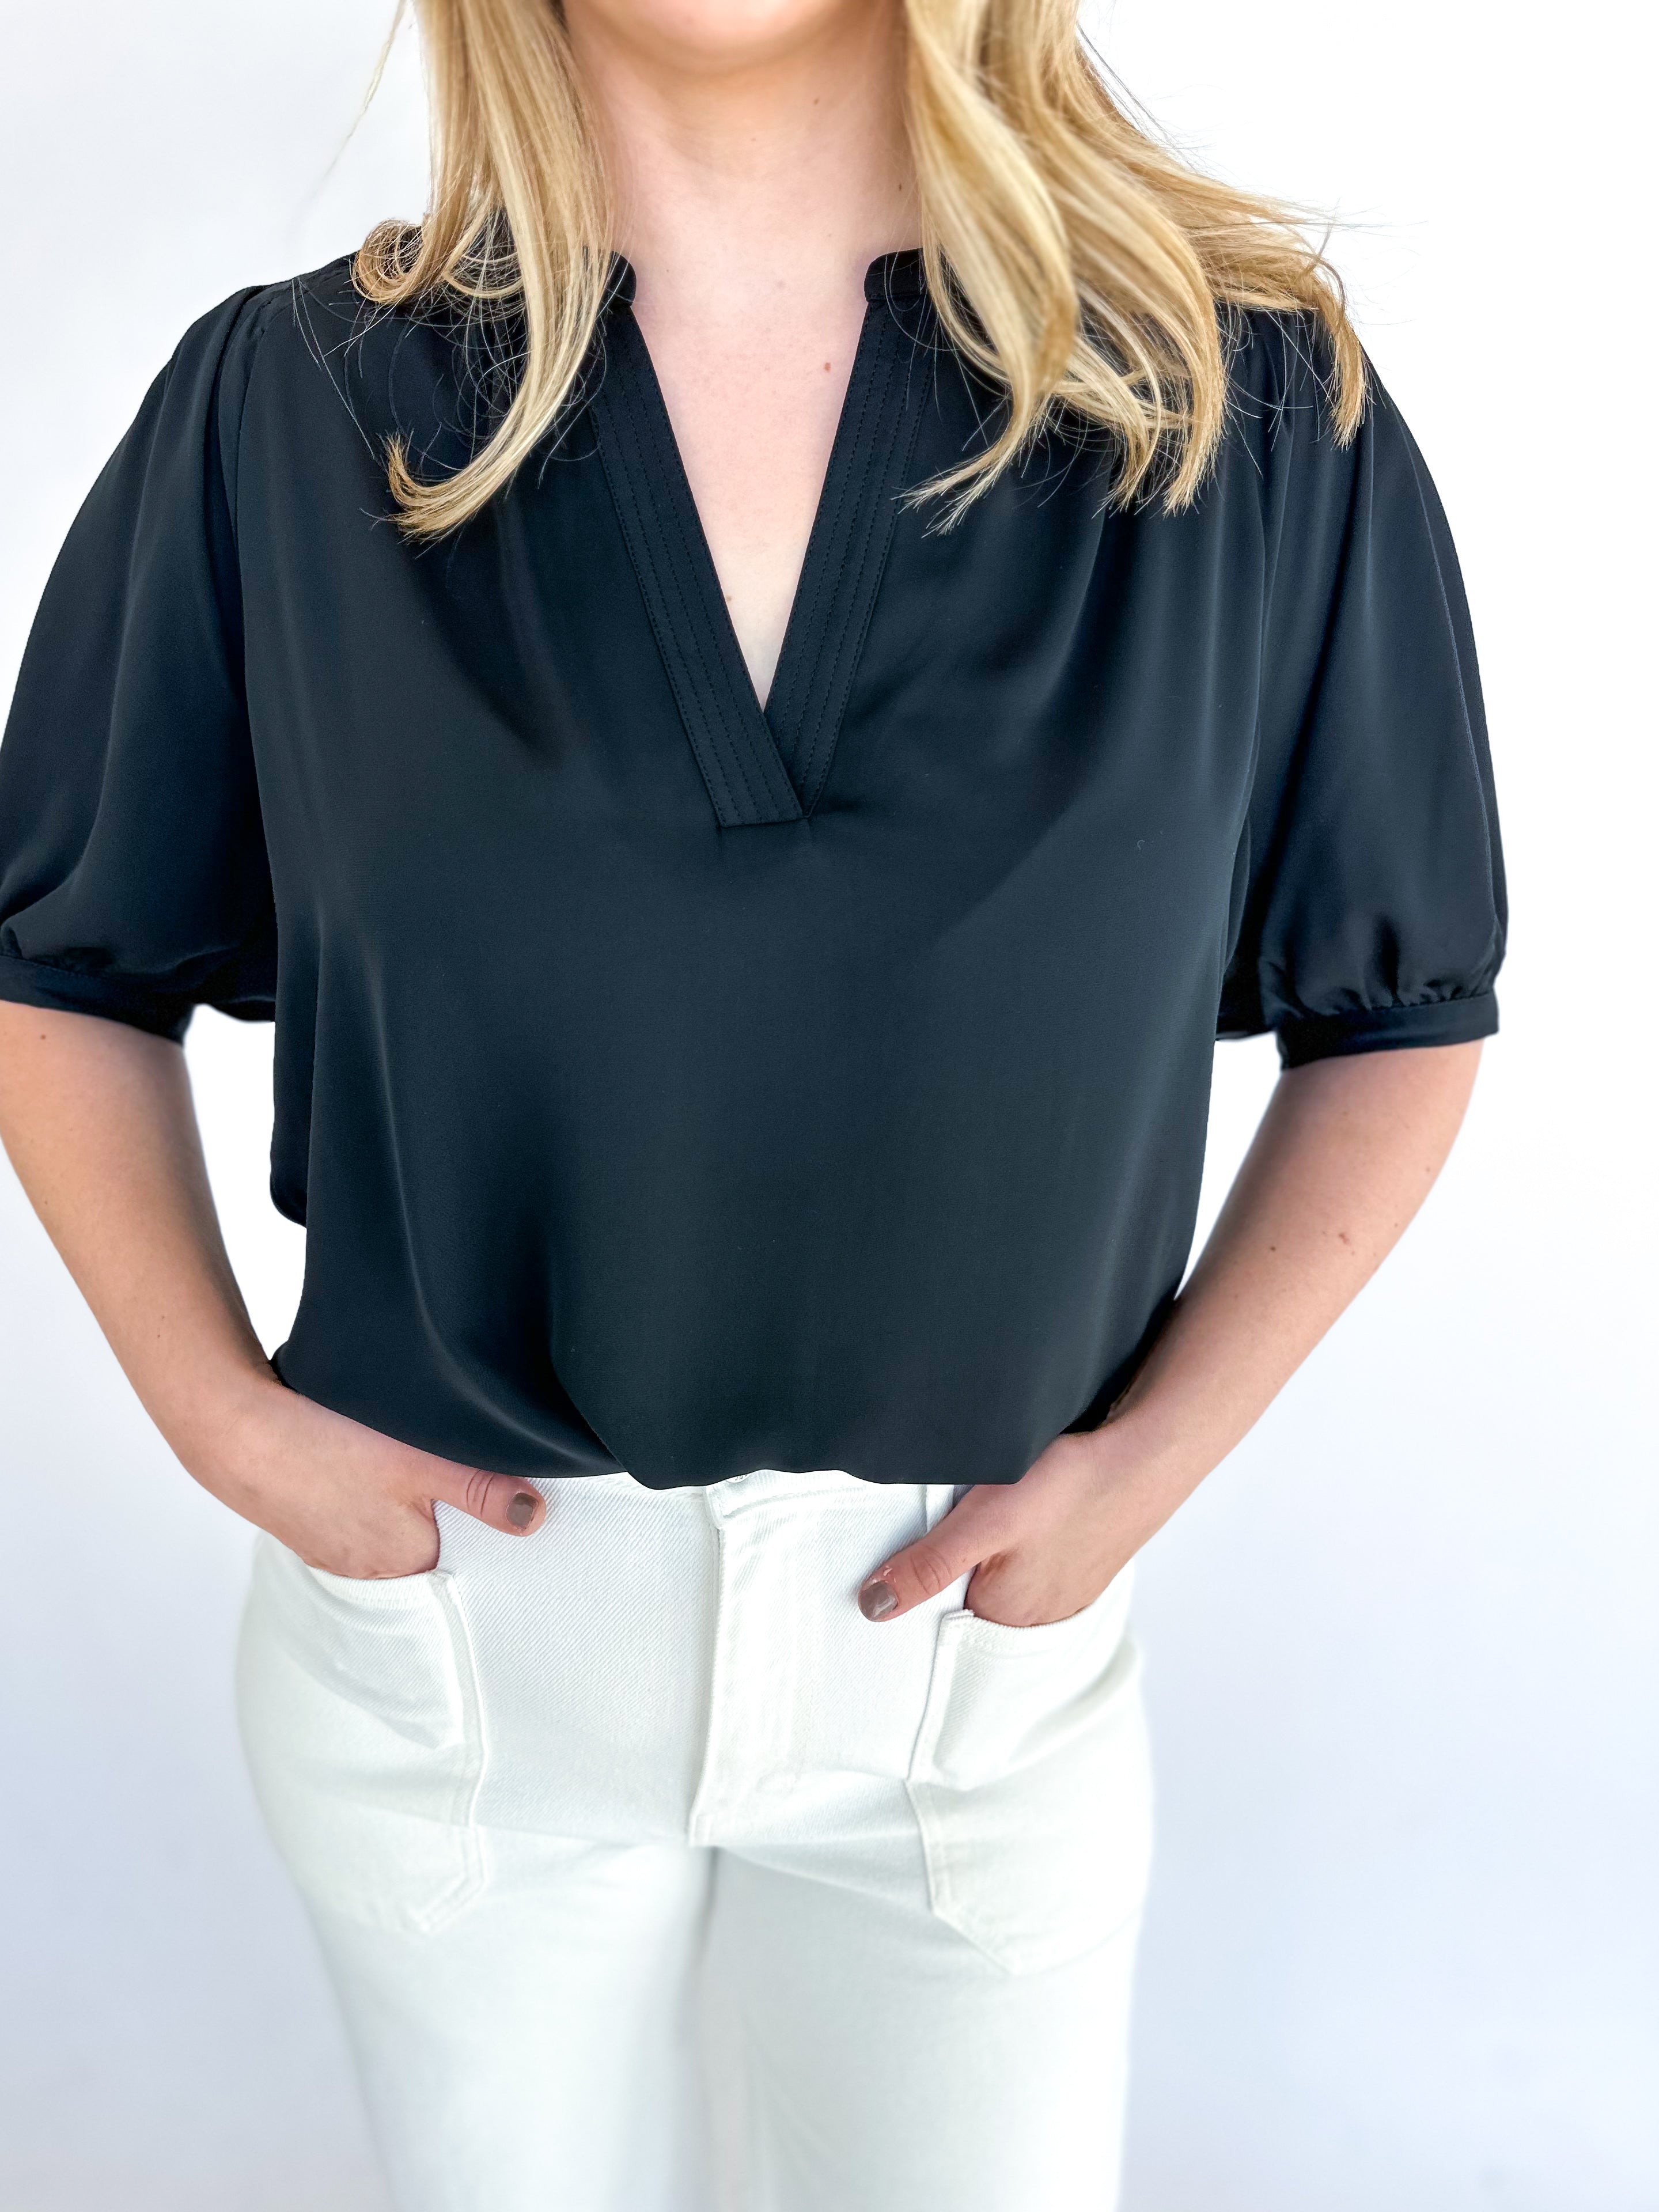 Quince Blouse - Black-200 Fashion Blouses-CURRENT AIR CLOTHING-July & June Women's Fashion Boutique Located in San Antonio, Texas